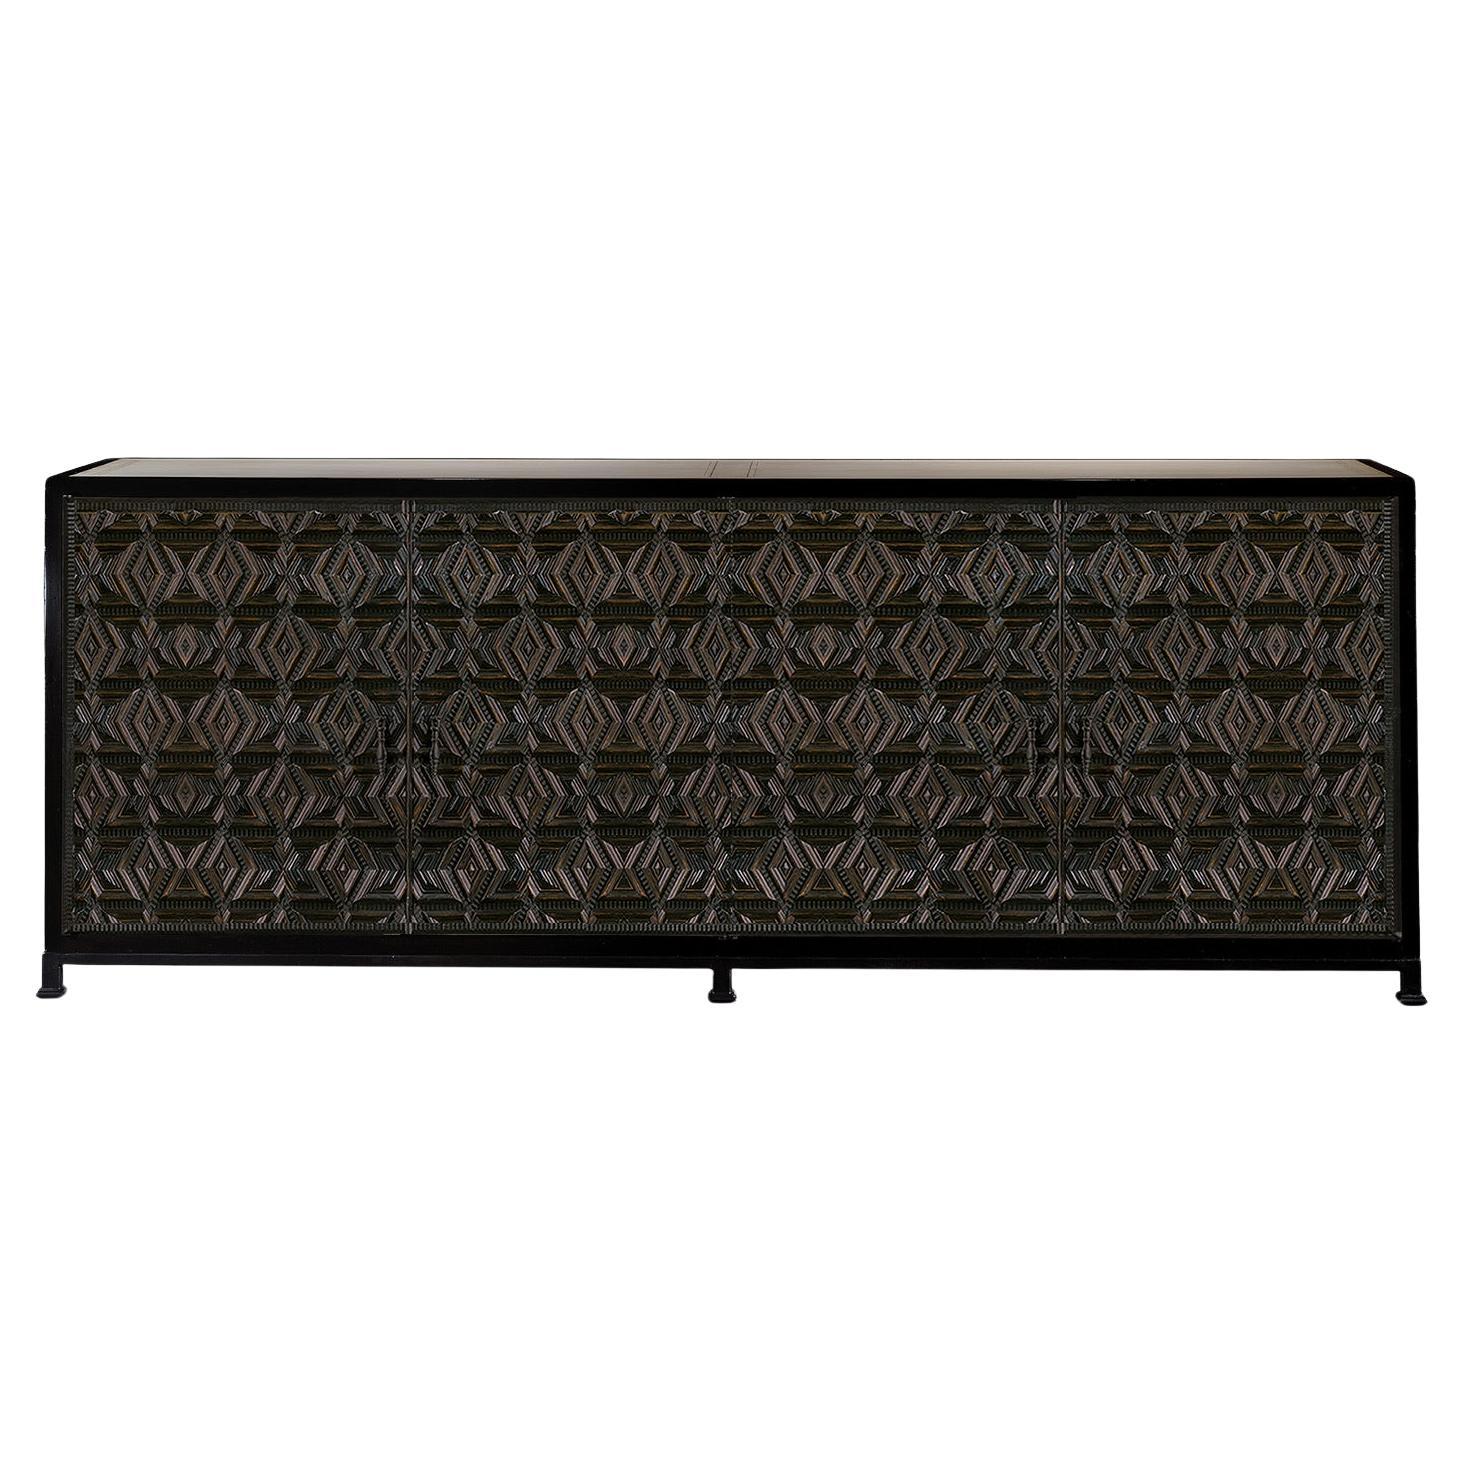 Queretano Buffet, a Statement Piece with Intricate Wood Decoration and Iron base